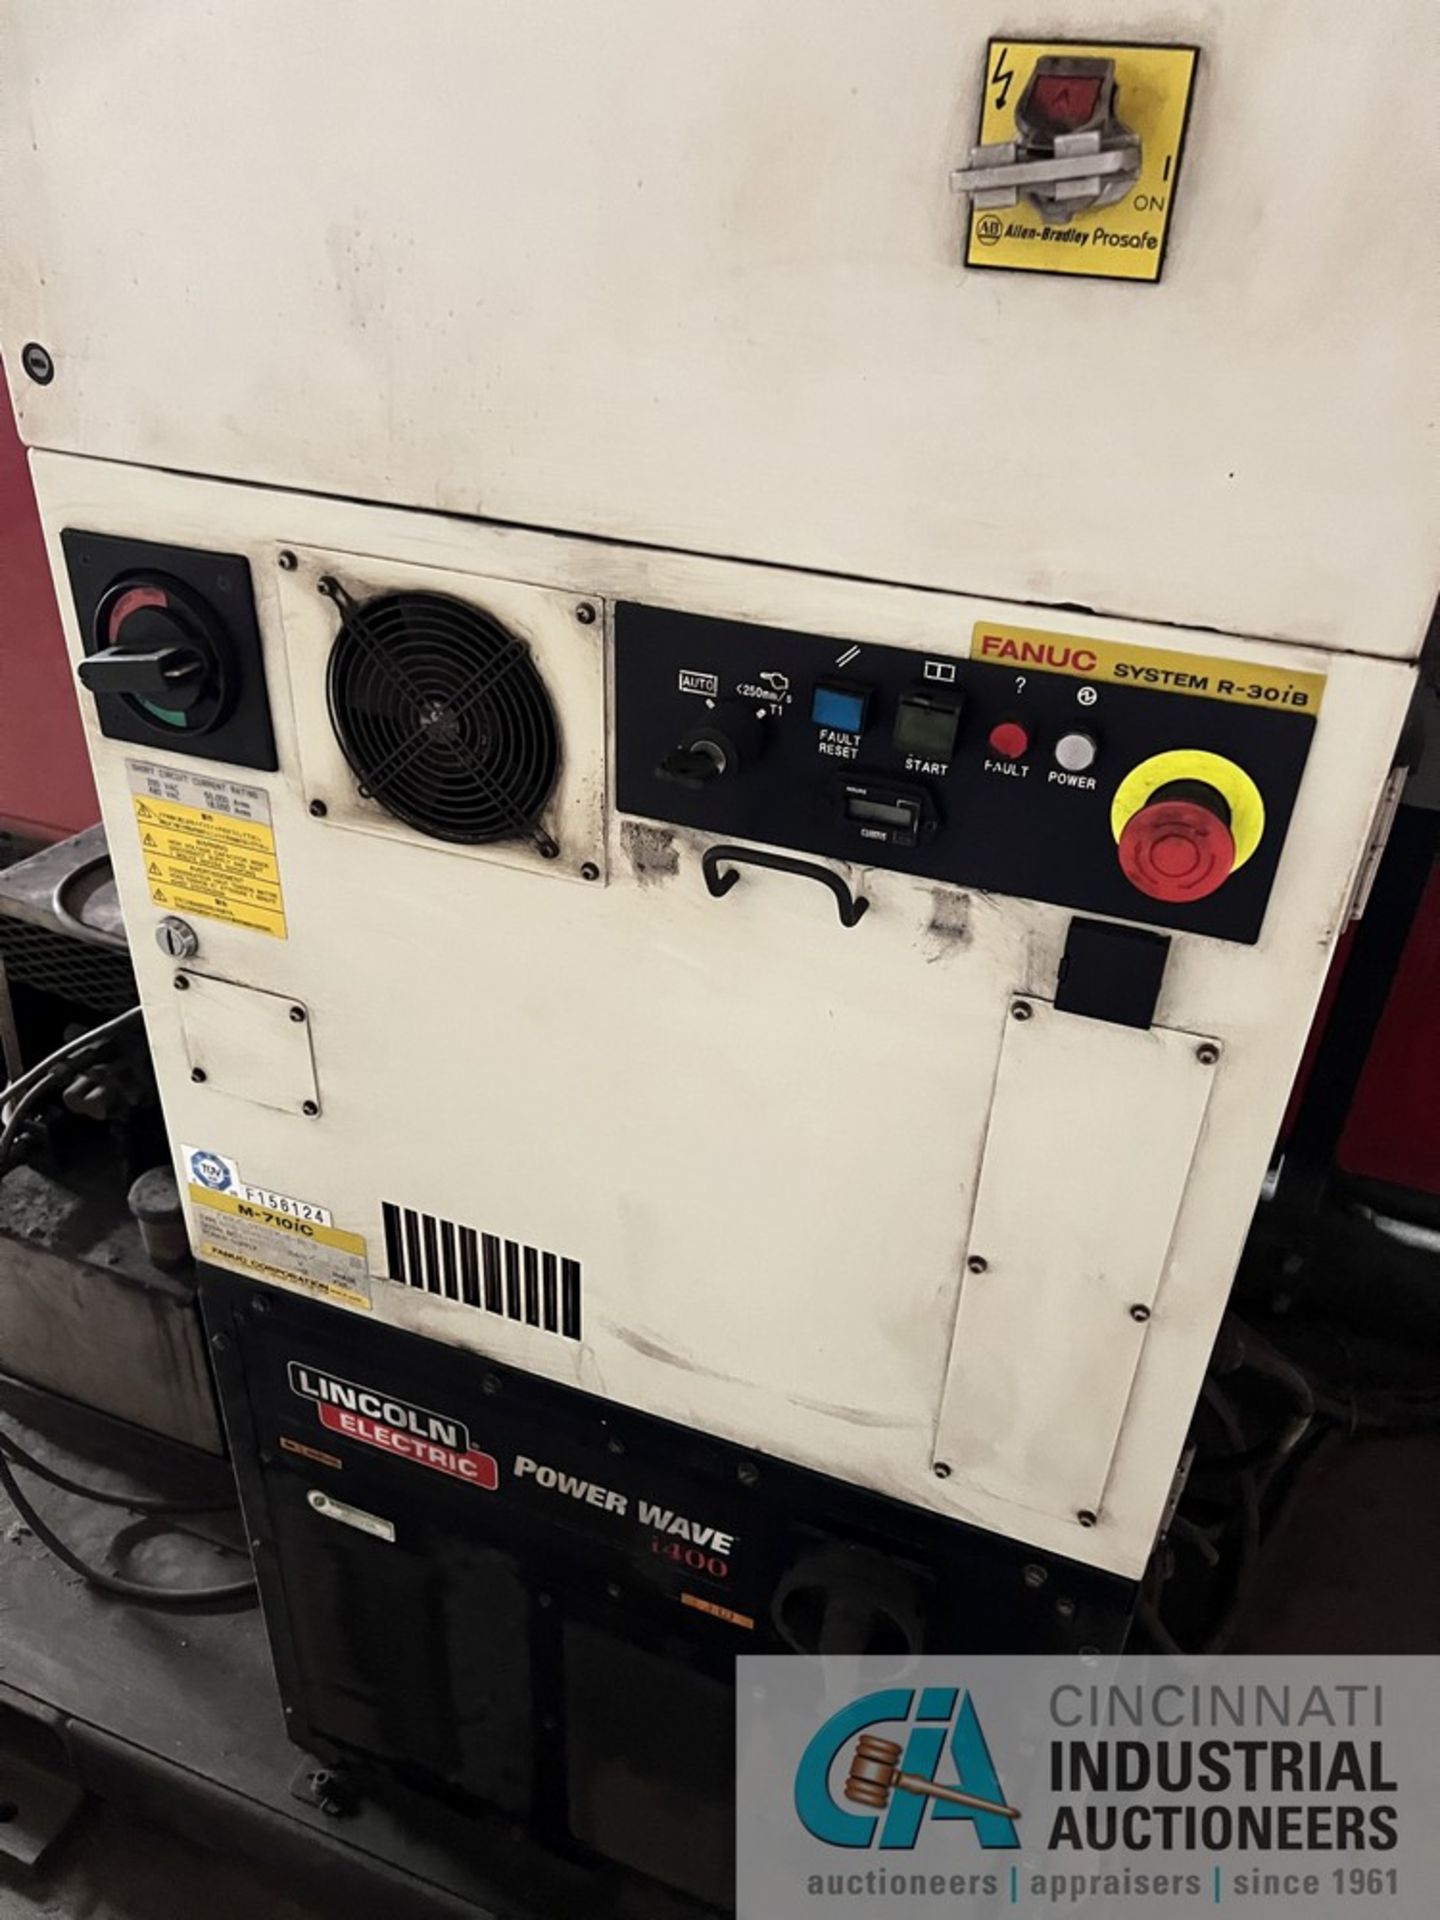 FANUC-LINCOLN ROBOTIC WELDING CELL (MISSING PART GRABBER); TENNESSEE RAND INTEGRATOR, COMPLETE - Image 21 of 26